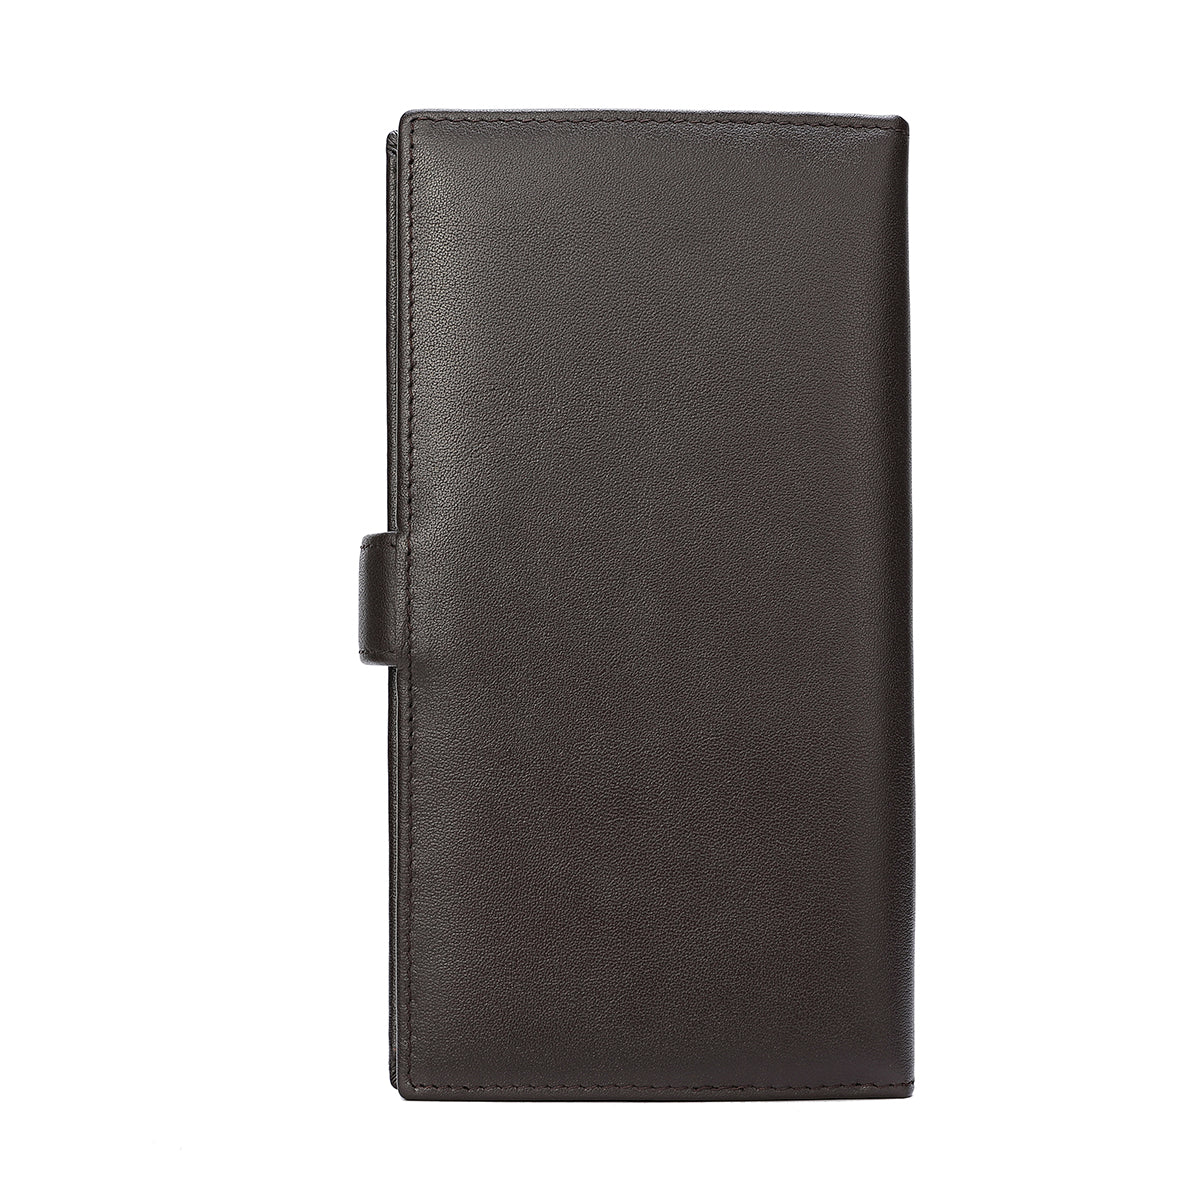 Wide genuine leather men's wallet, 18 cm wide, in two colors